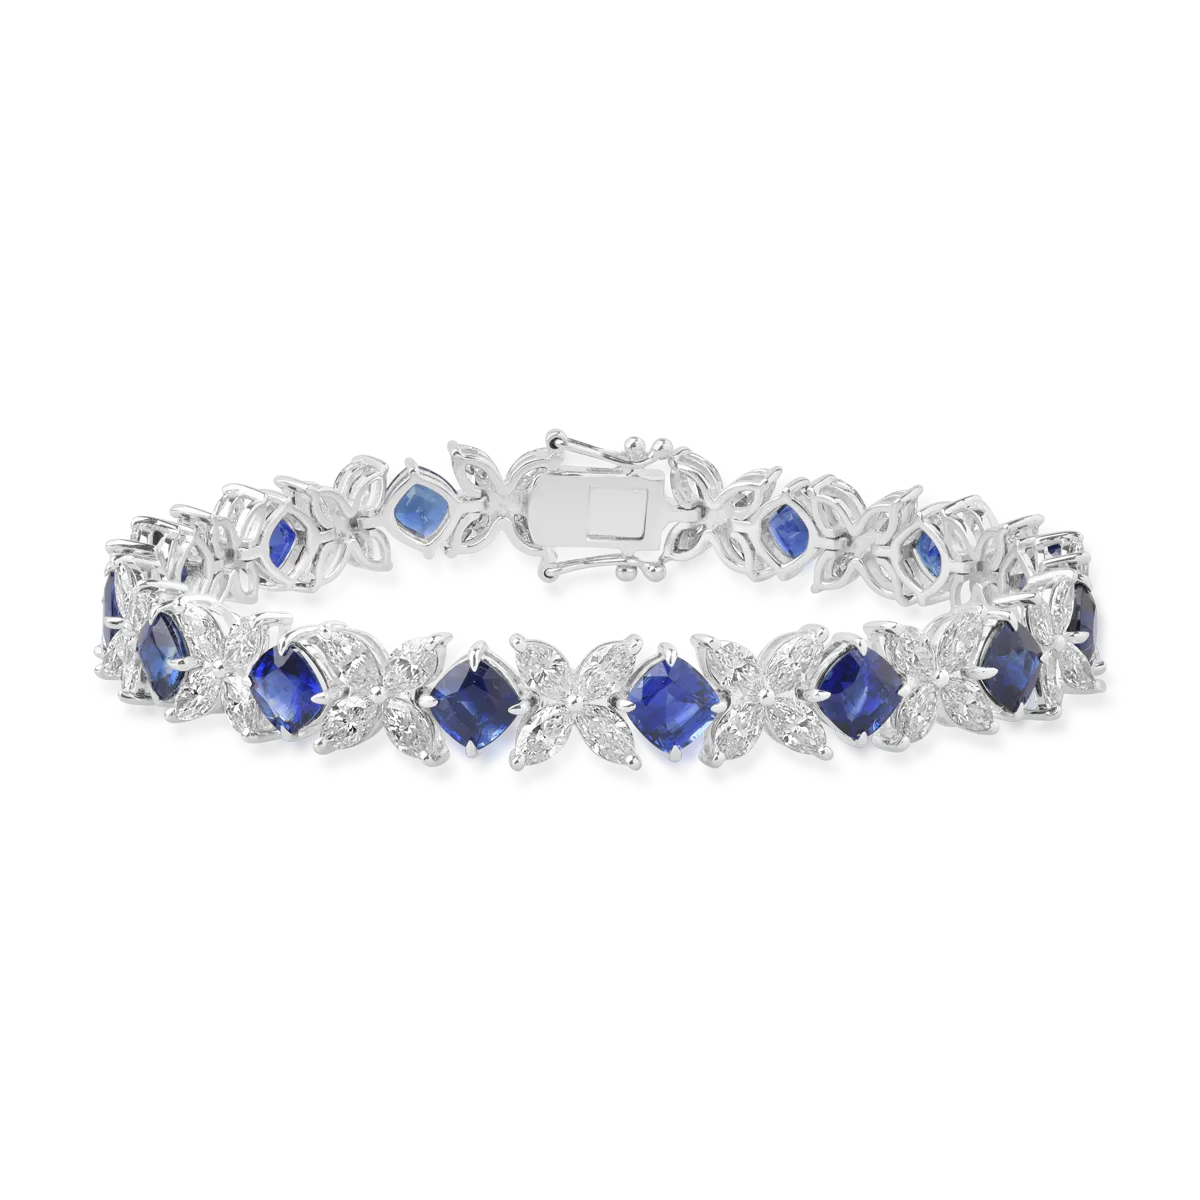 18K white gold bracelet with 10.45ct sapphire and 7.96ct diamonds